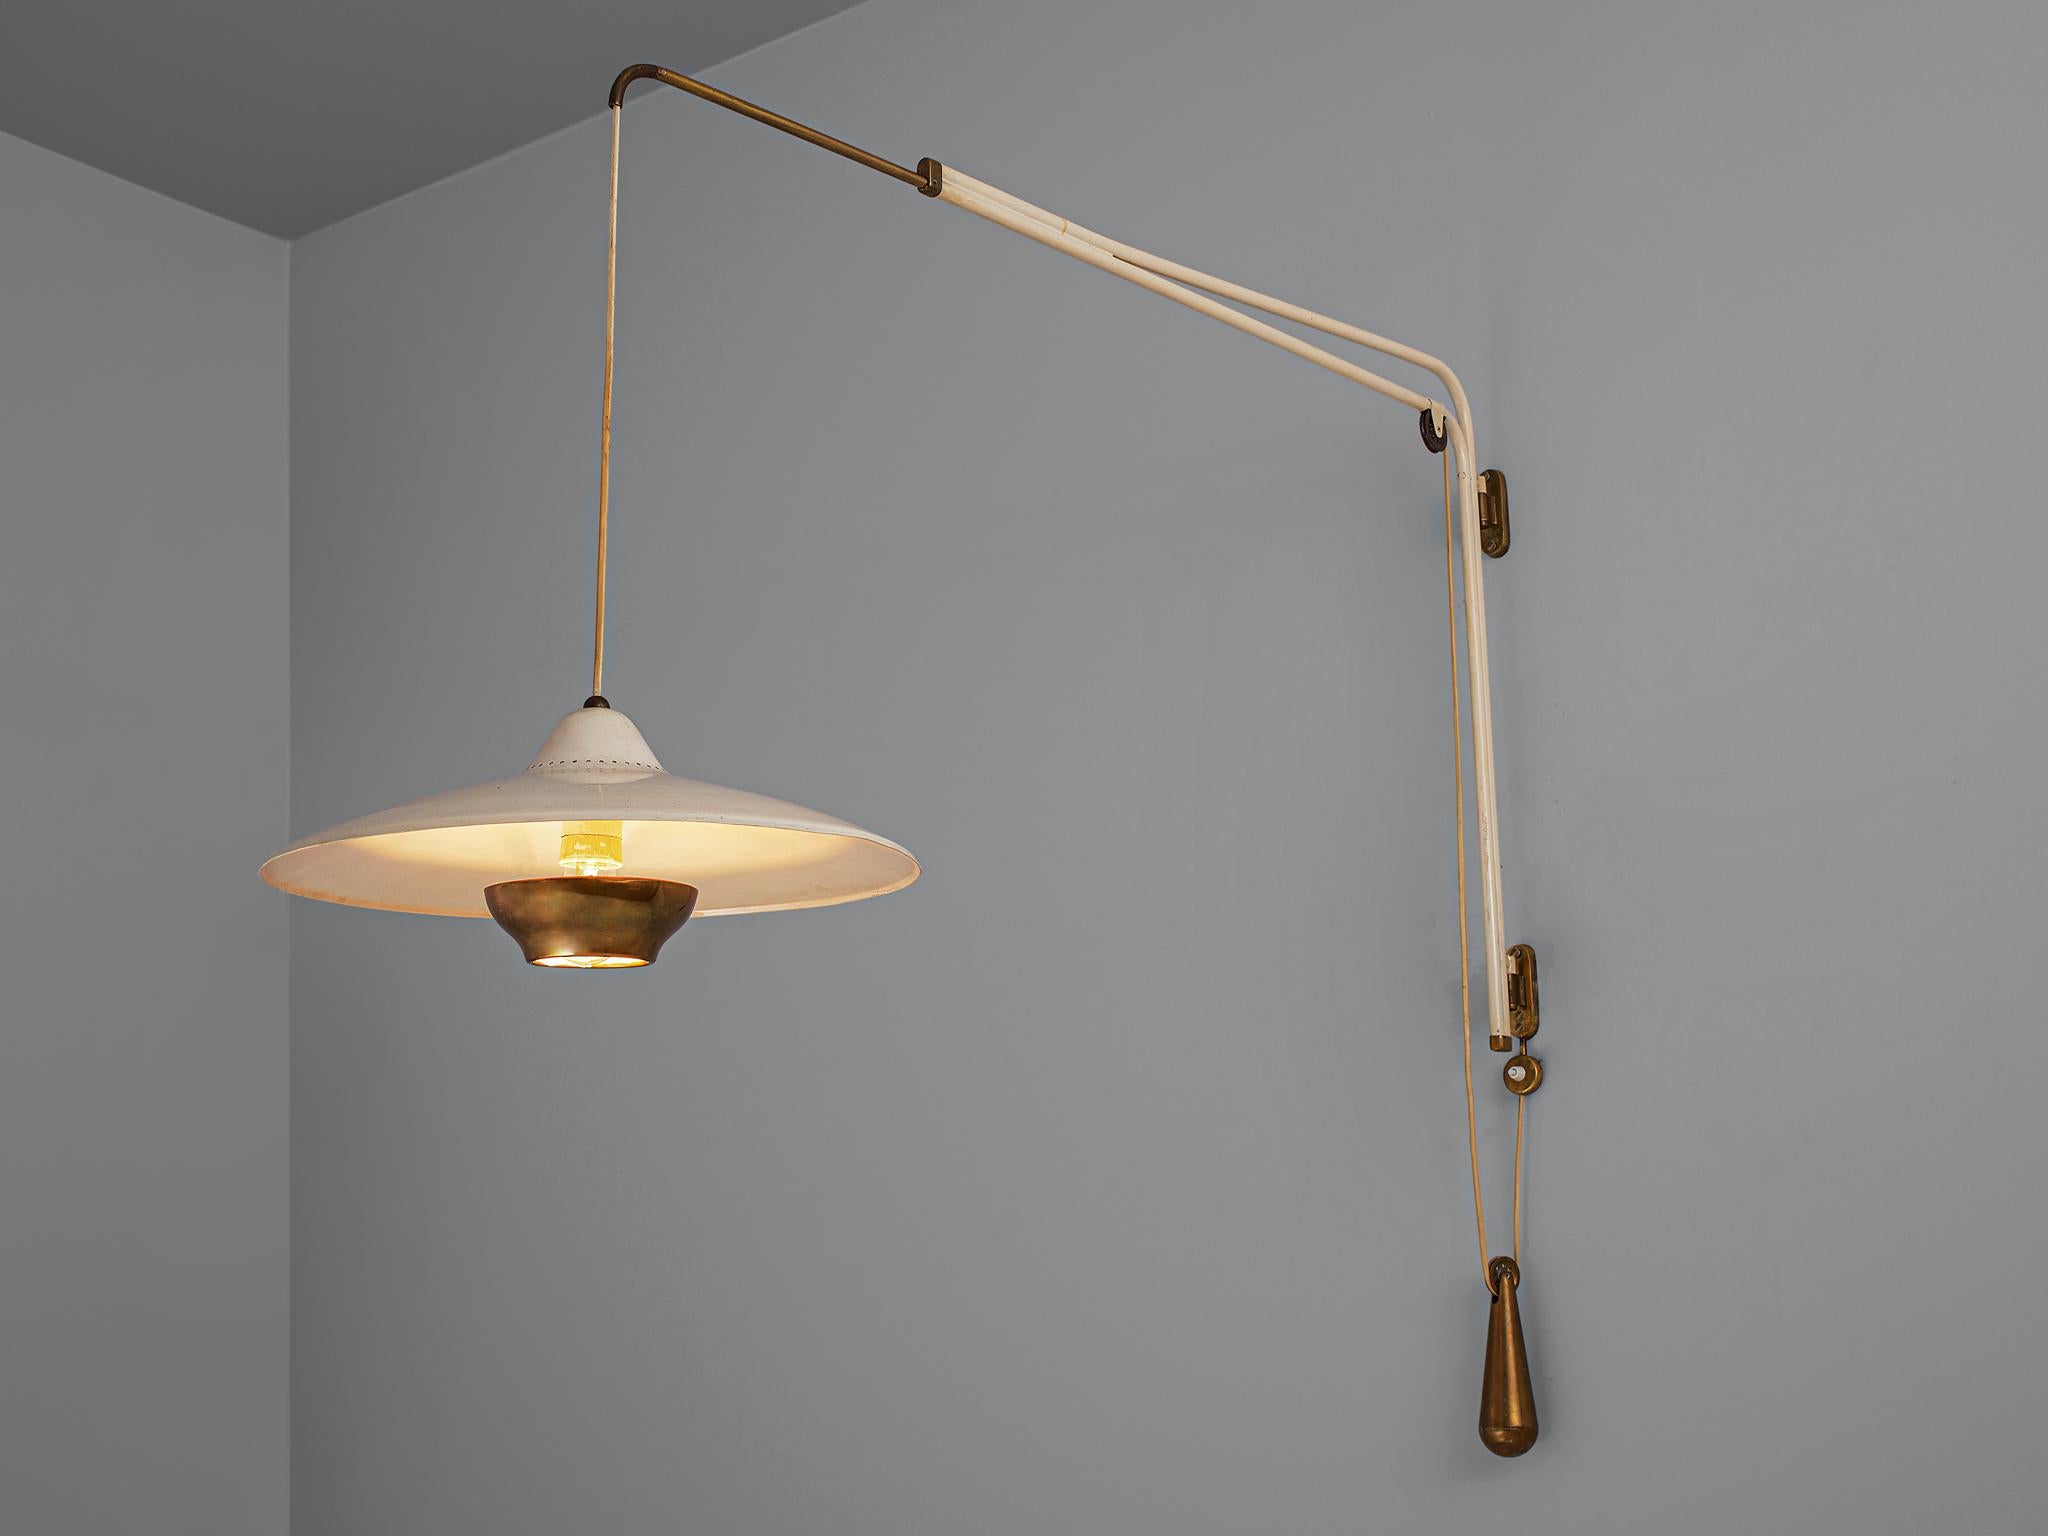 Franco Buzzi for O-Luce, wall light model B3, brass and aluminum, Italy, 1950s.

Exceptional Italian wall-mounted wall-light B3 by Franco Buzzi for O-Luce from the 1950s. This unique piece is extendable and adjustable in high due the use of an